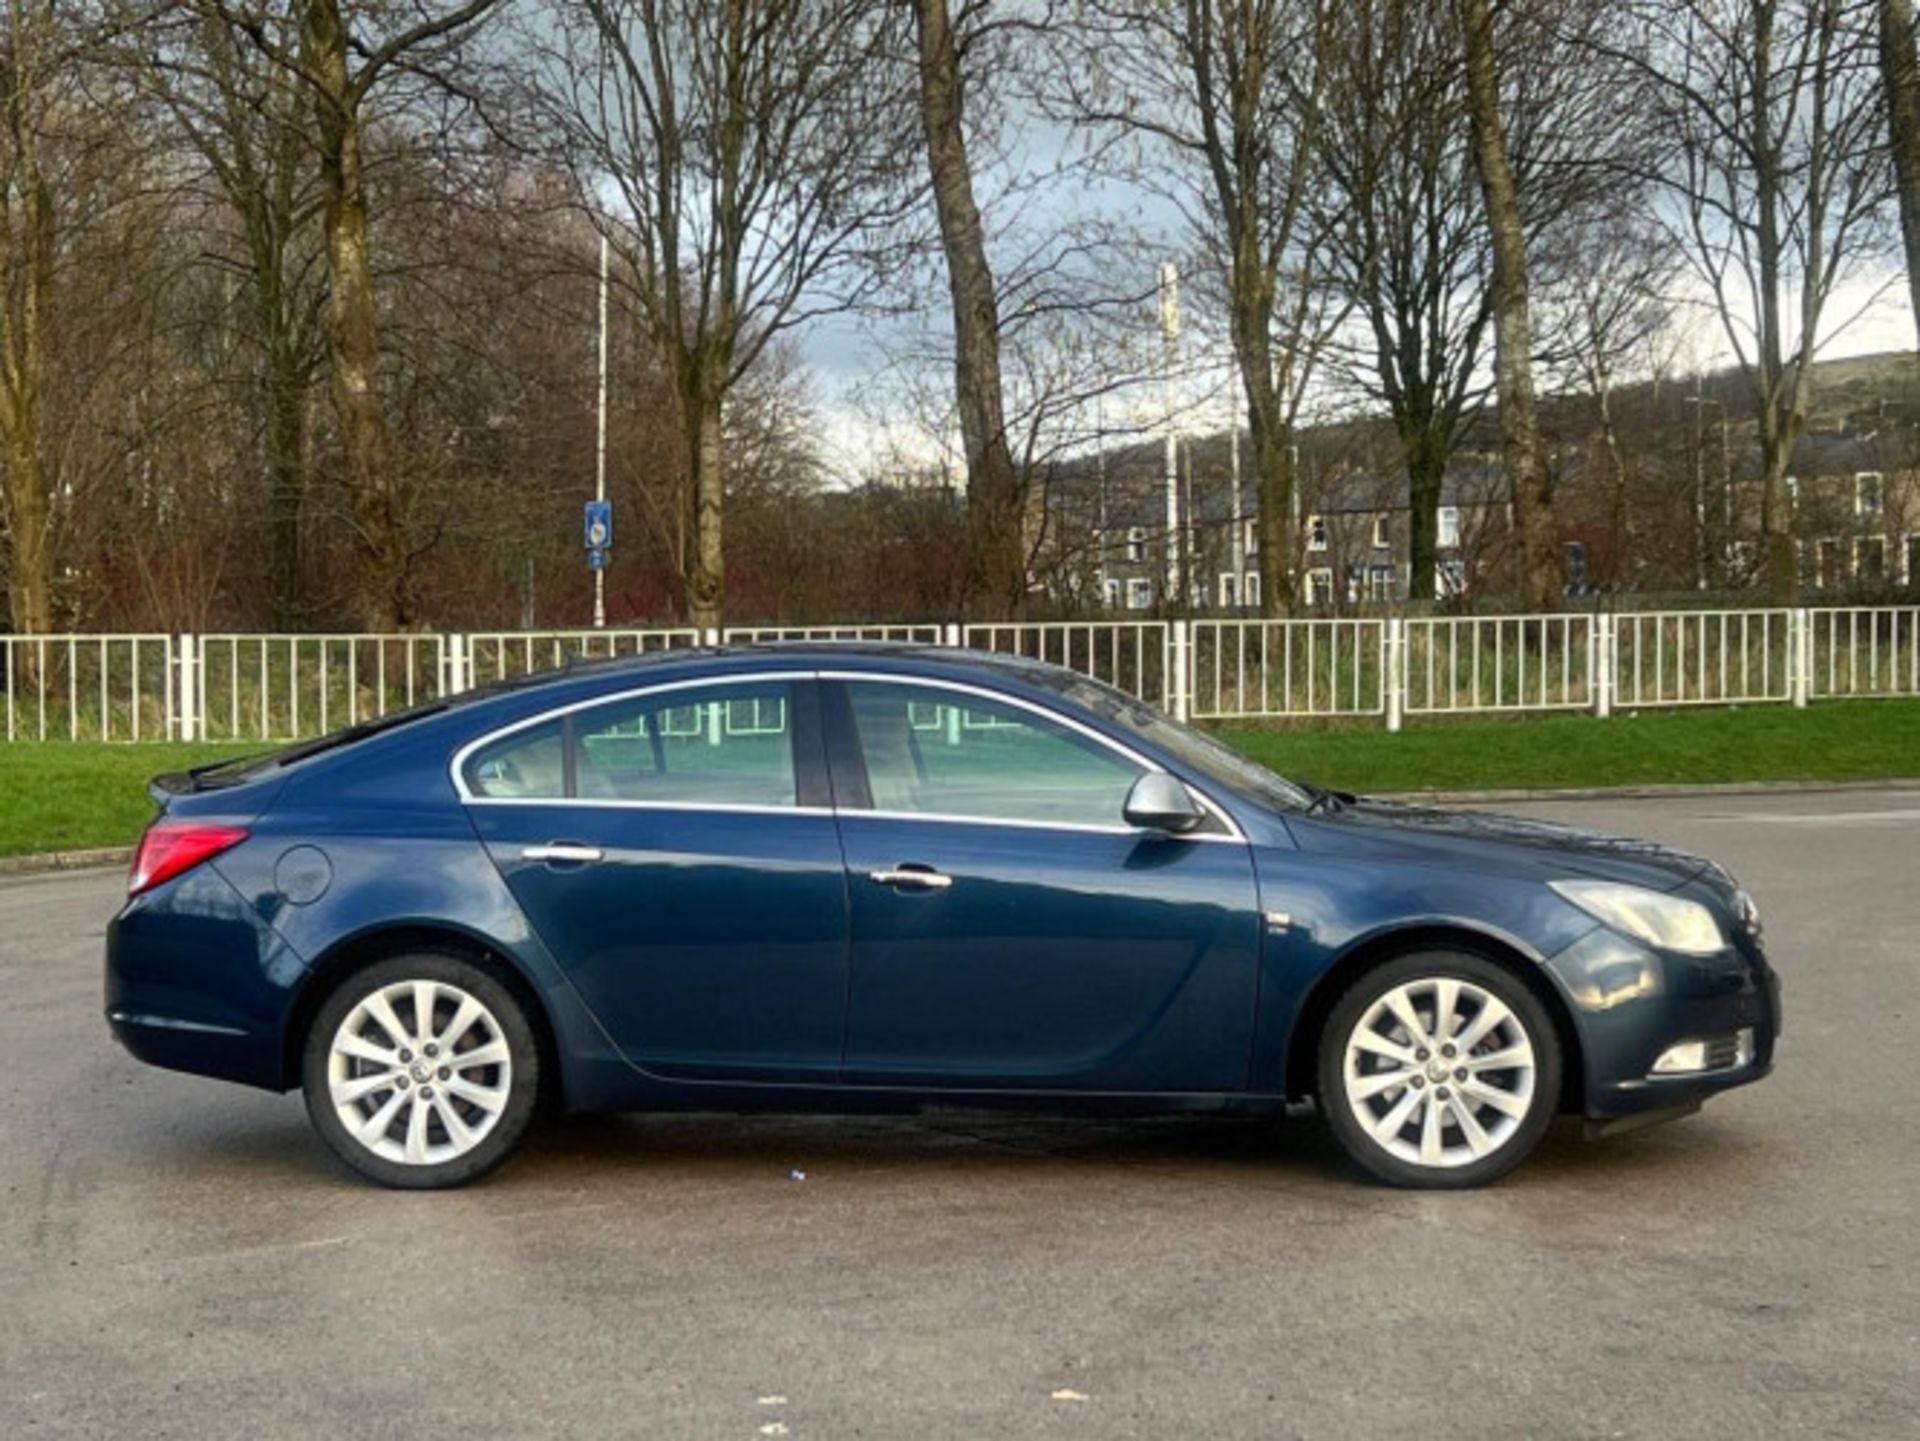 2012 VAUXHALL INSIGNIA 2.0 CDTI ELITE AUTO EURO 5 - DISCOVER EXCELLENCE >>--NO VAT ON HAMMER--<< - Image 76 of 79